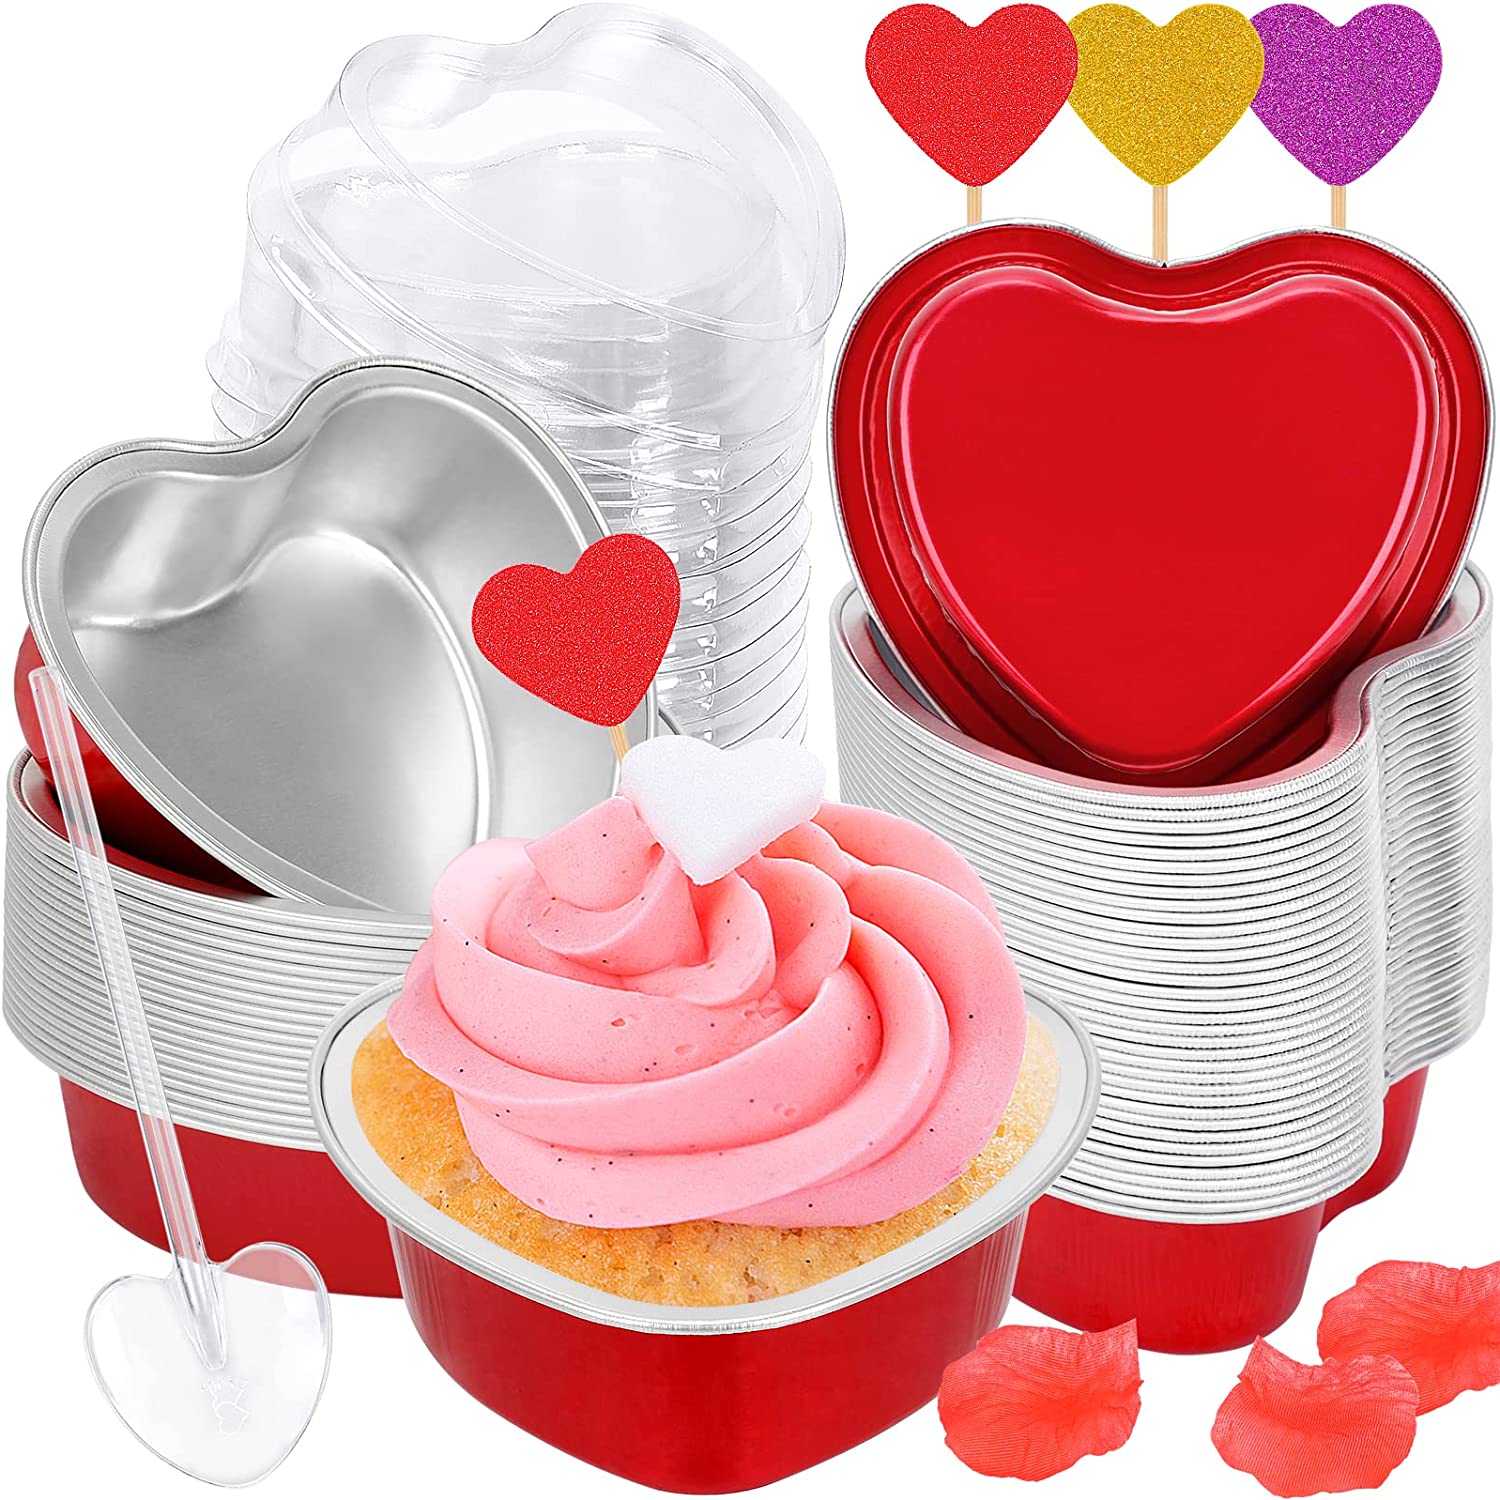 ZOENHOU 4 PCS 5 6 8 10 Heart Shaped Cake Pans with Removable Bottom,  Aluminum Heart Shaped Cake Pans Set, Non Stick Heart Layers Cake Pan for  Oven